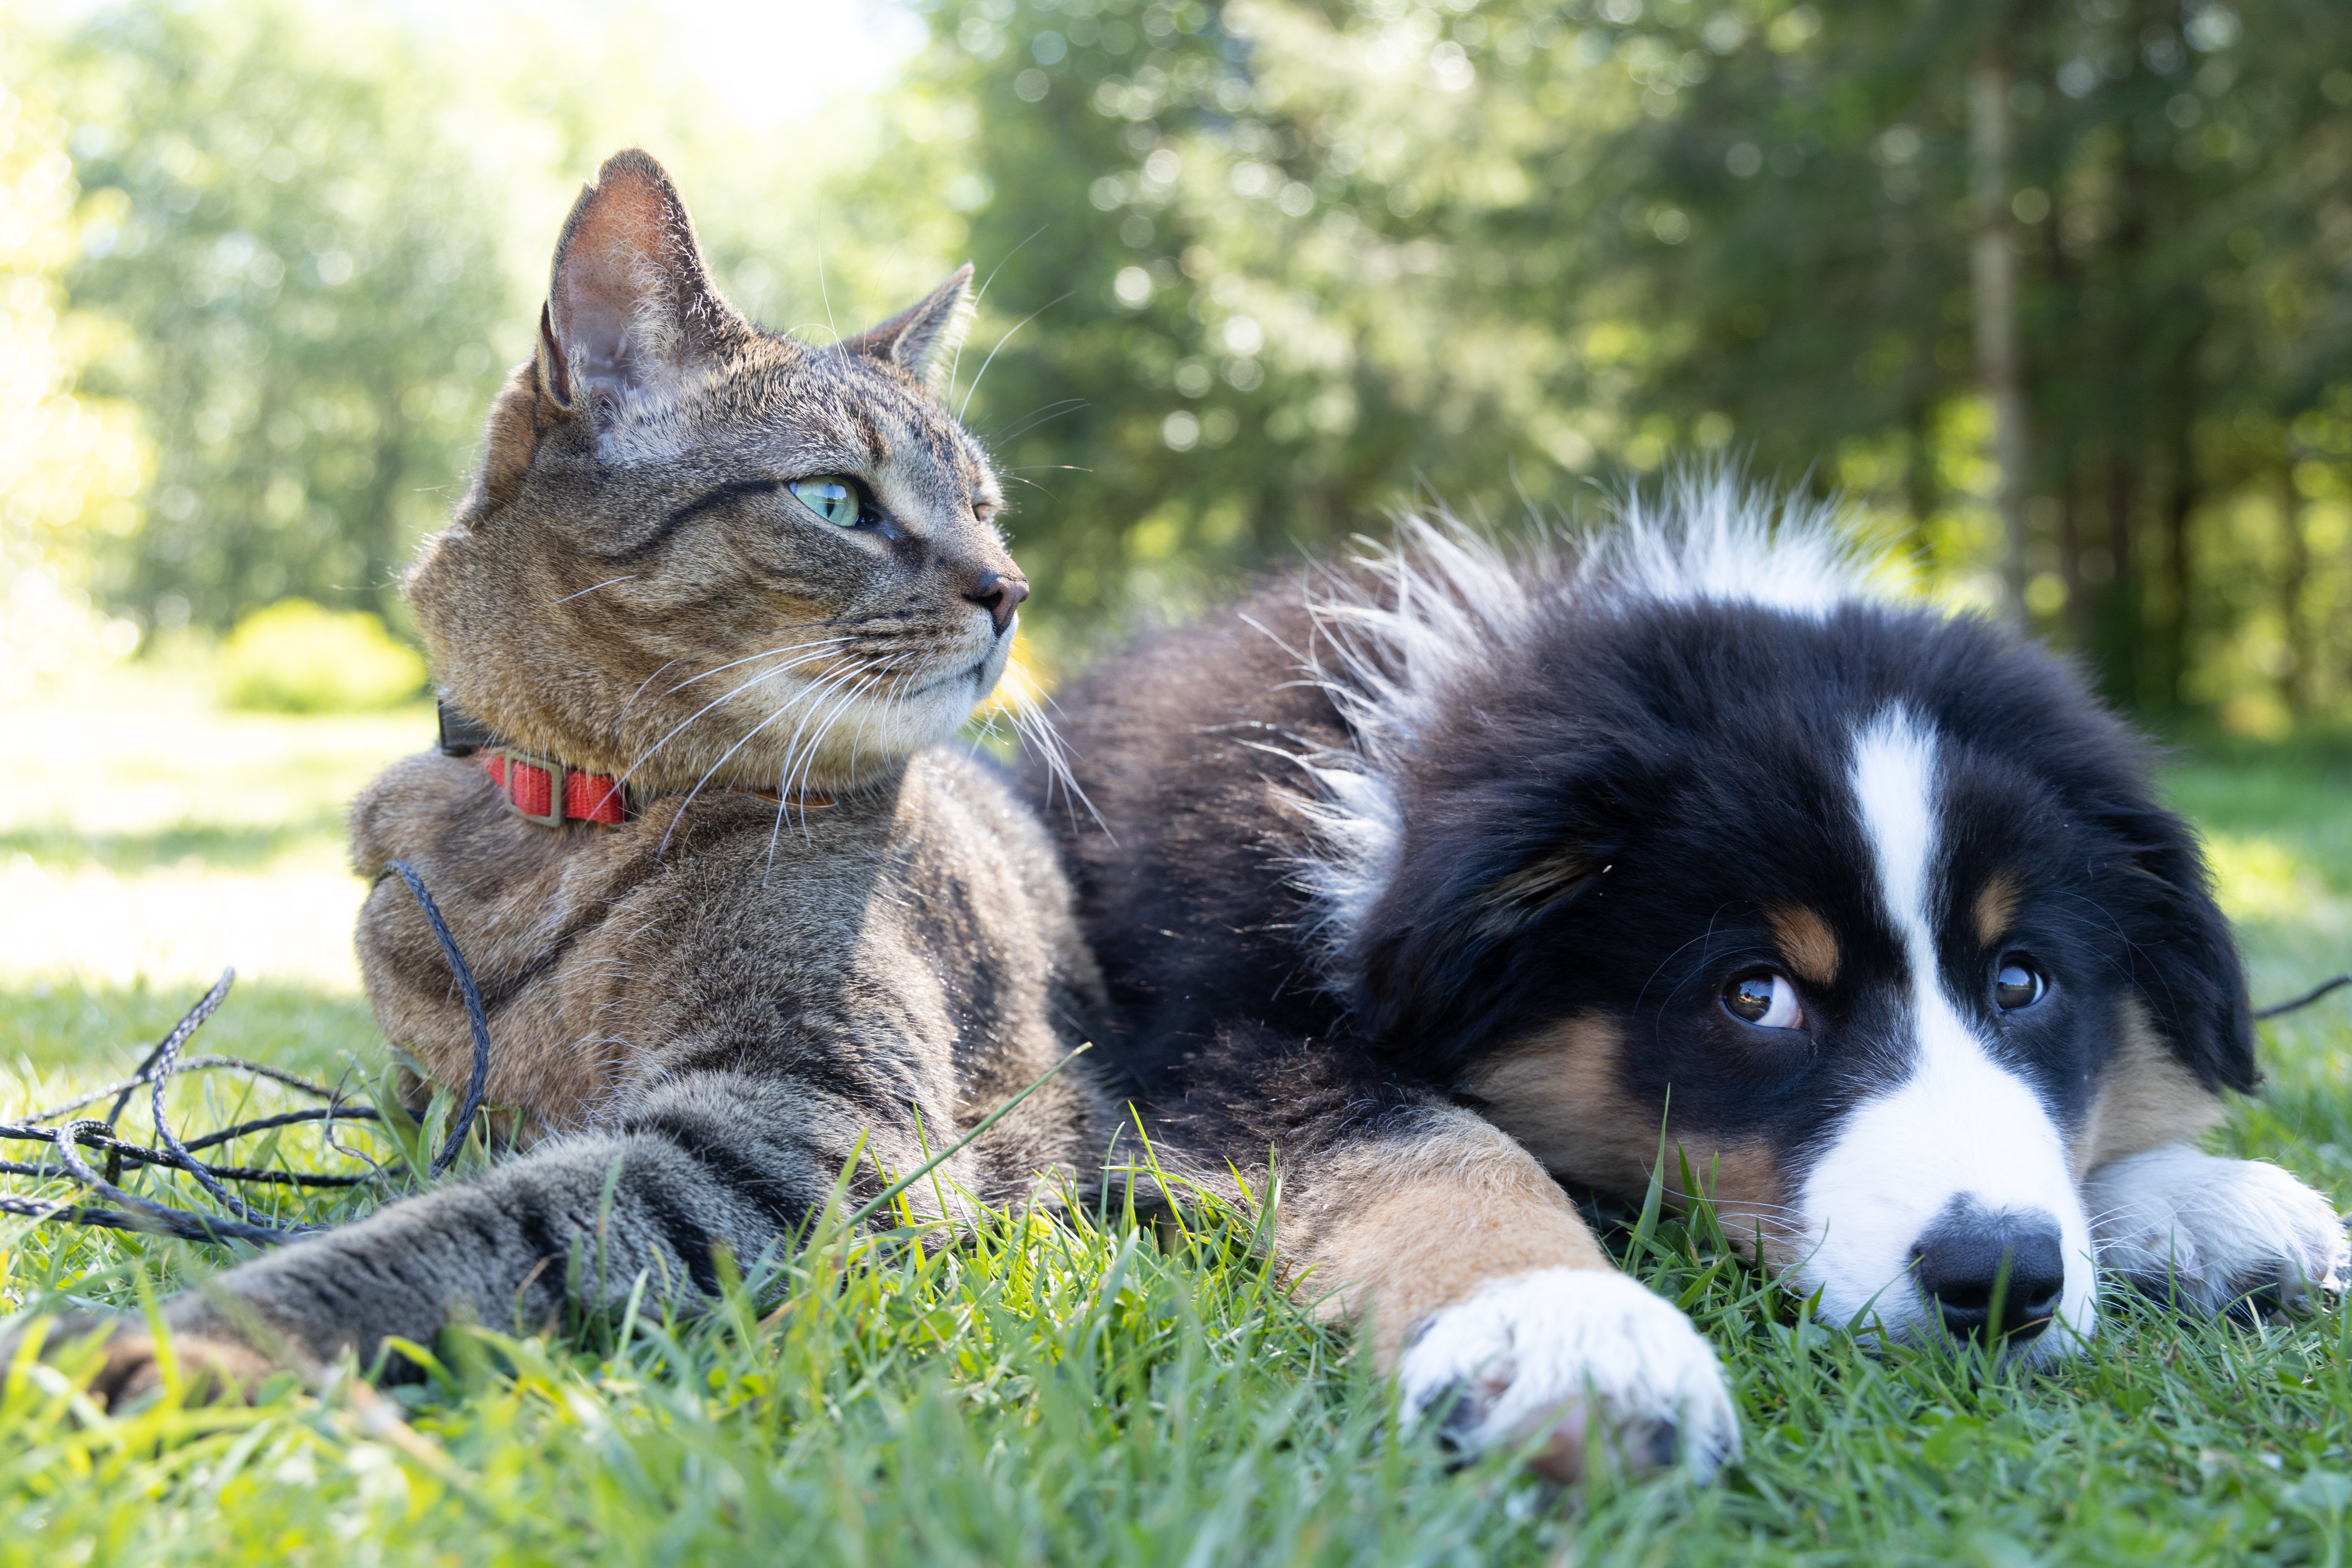 Cat and dog next to each other on the grass